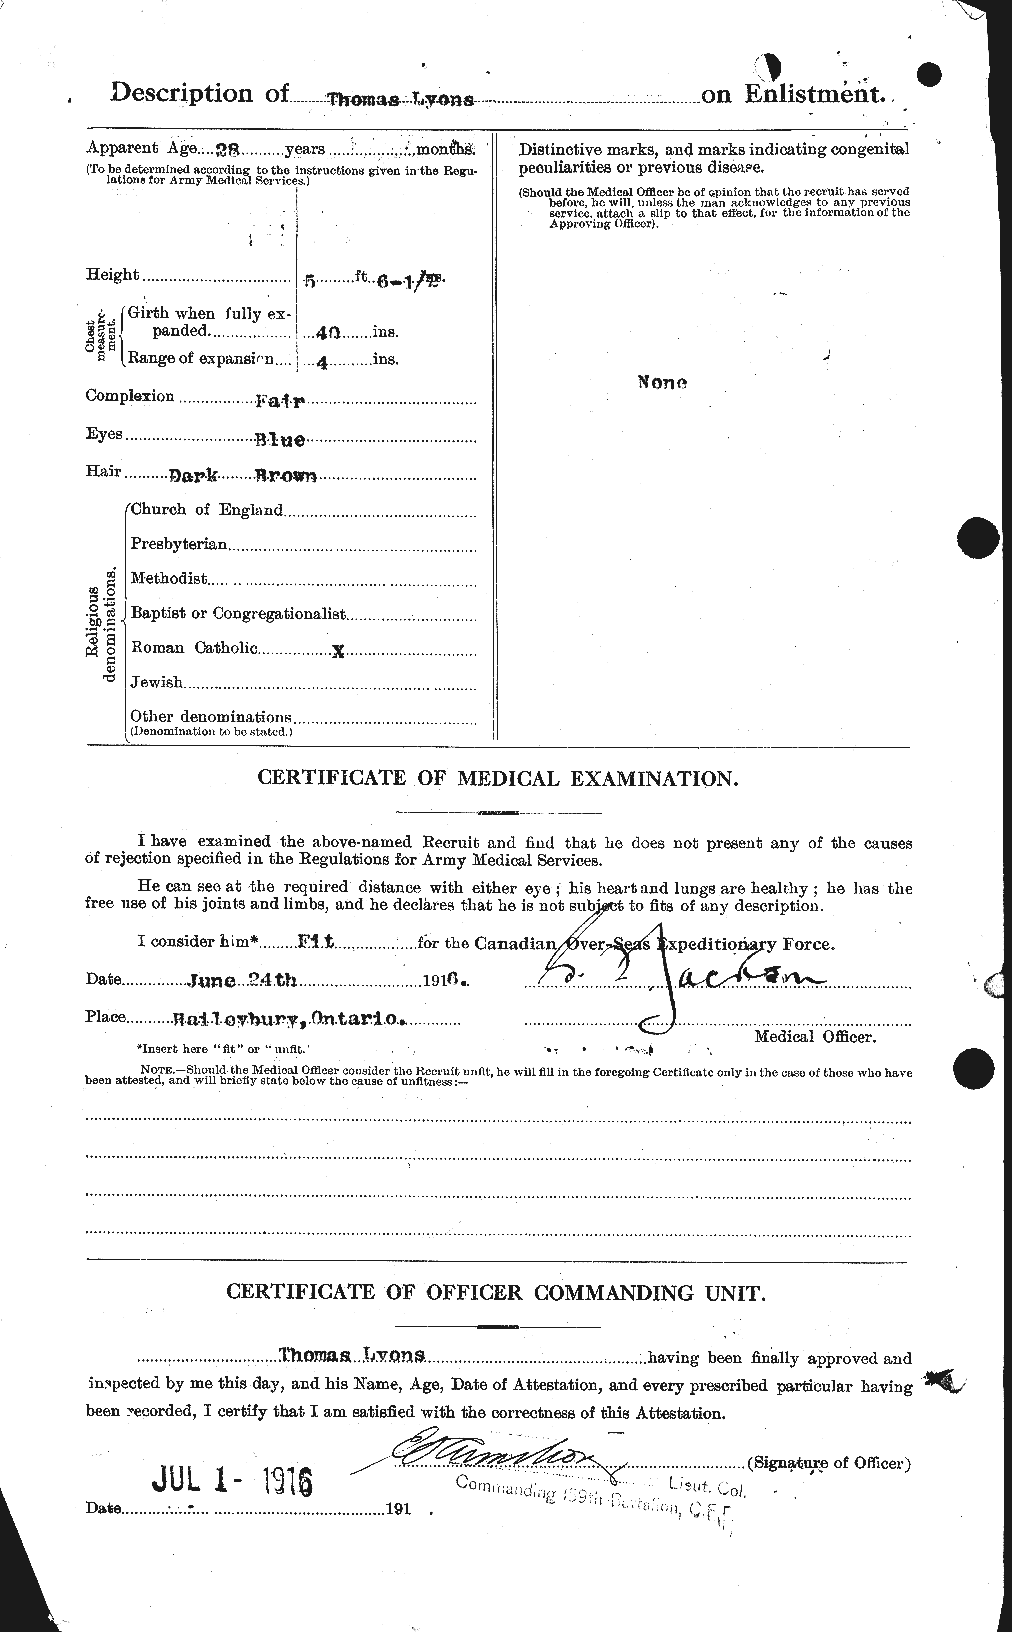 Personnel Records of the First World War - CEF 474862b